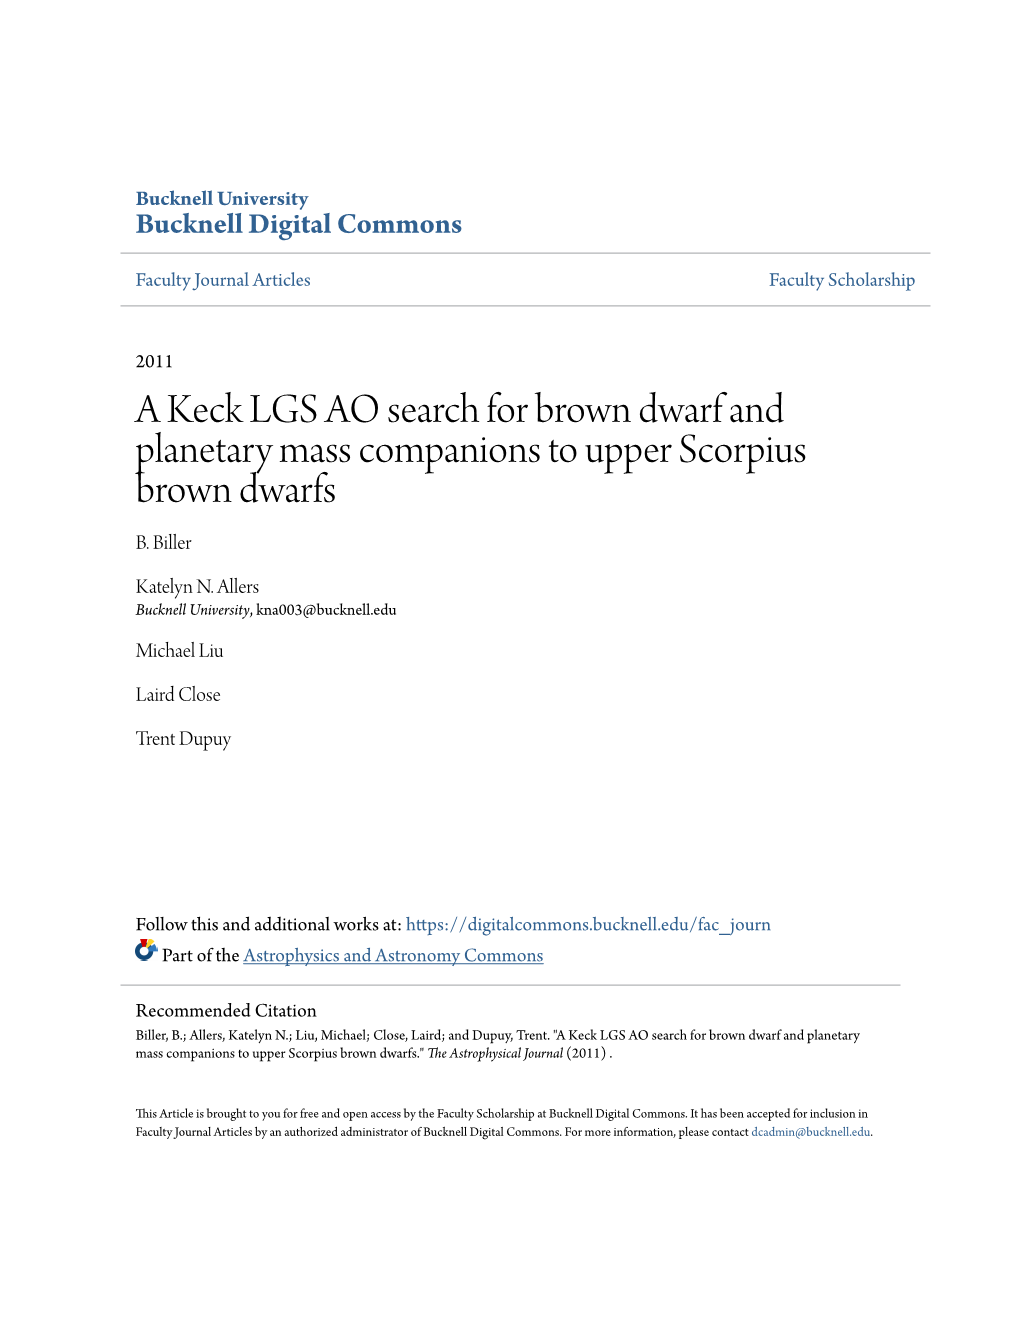 A Keck LGS AO Search for Brown Dwarf and Planetary Mass Companions to Upper Scorpius Brown Dwarfs B